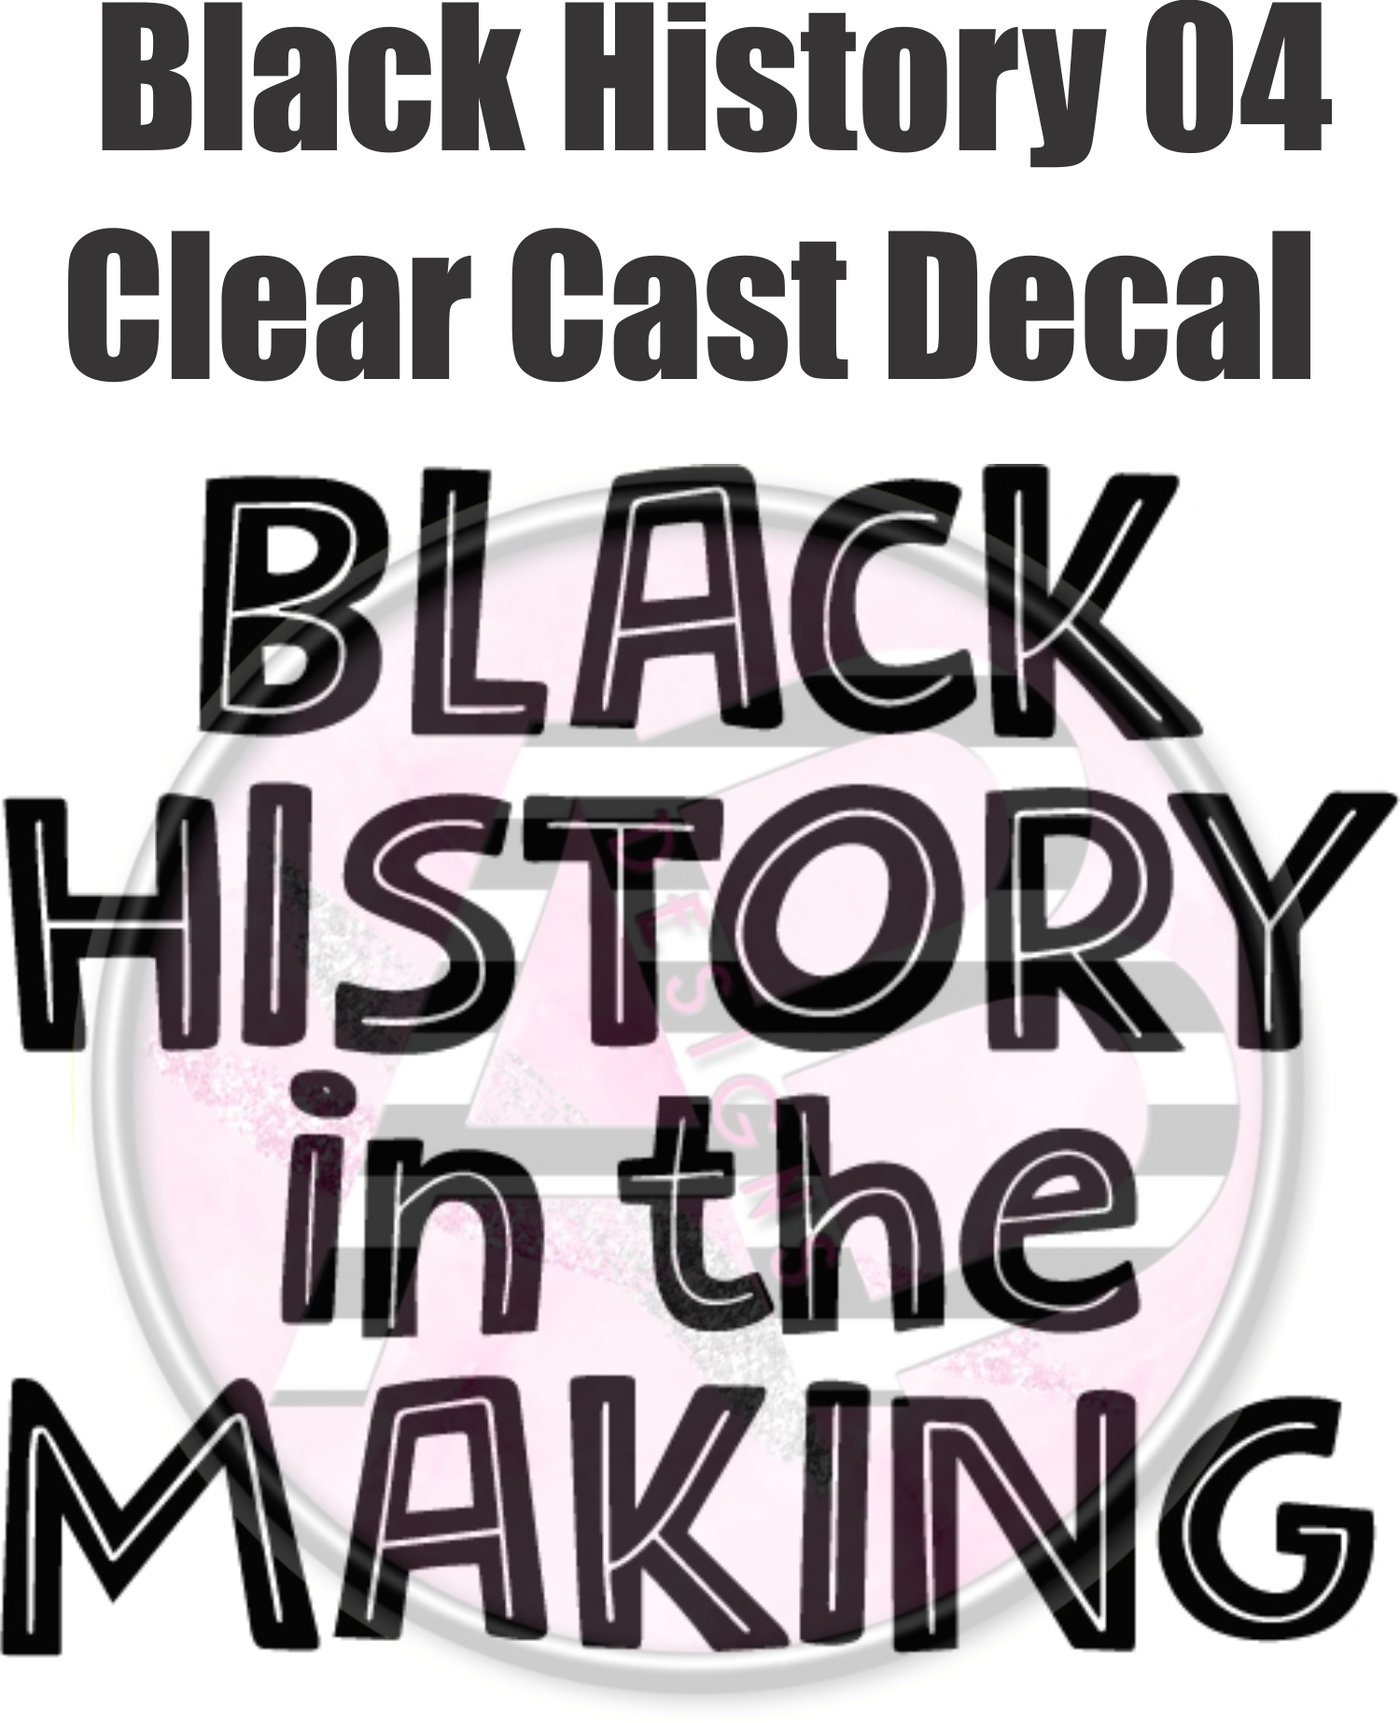 Black History 04 - Clear Cast Decal